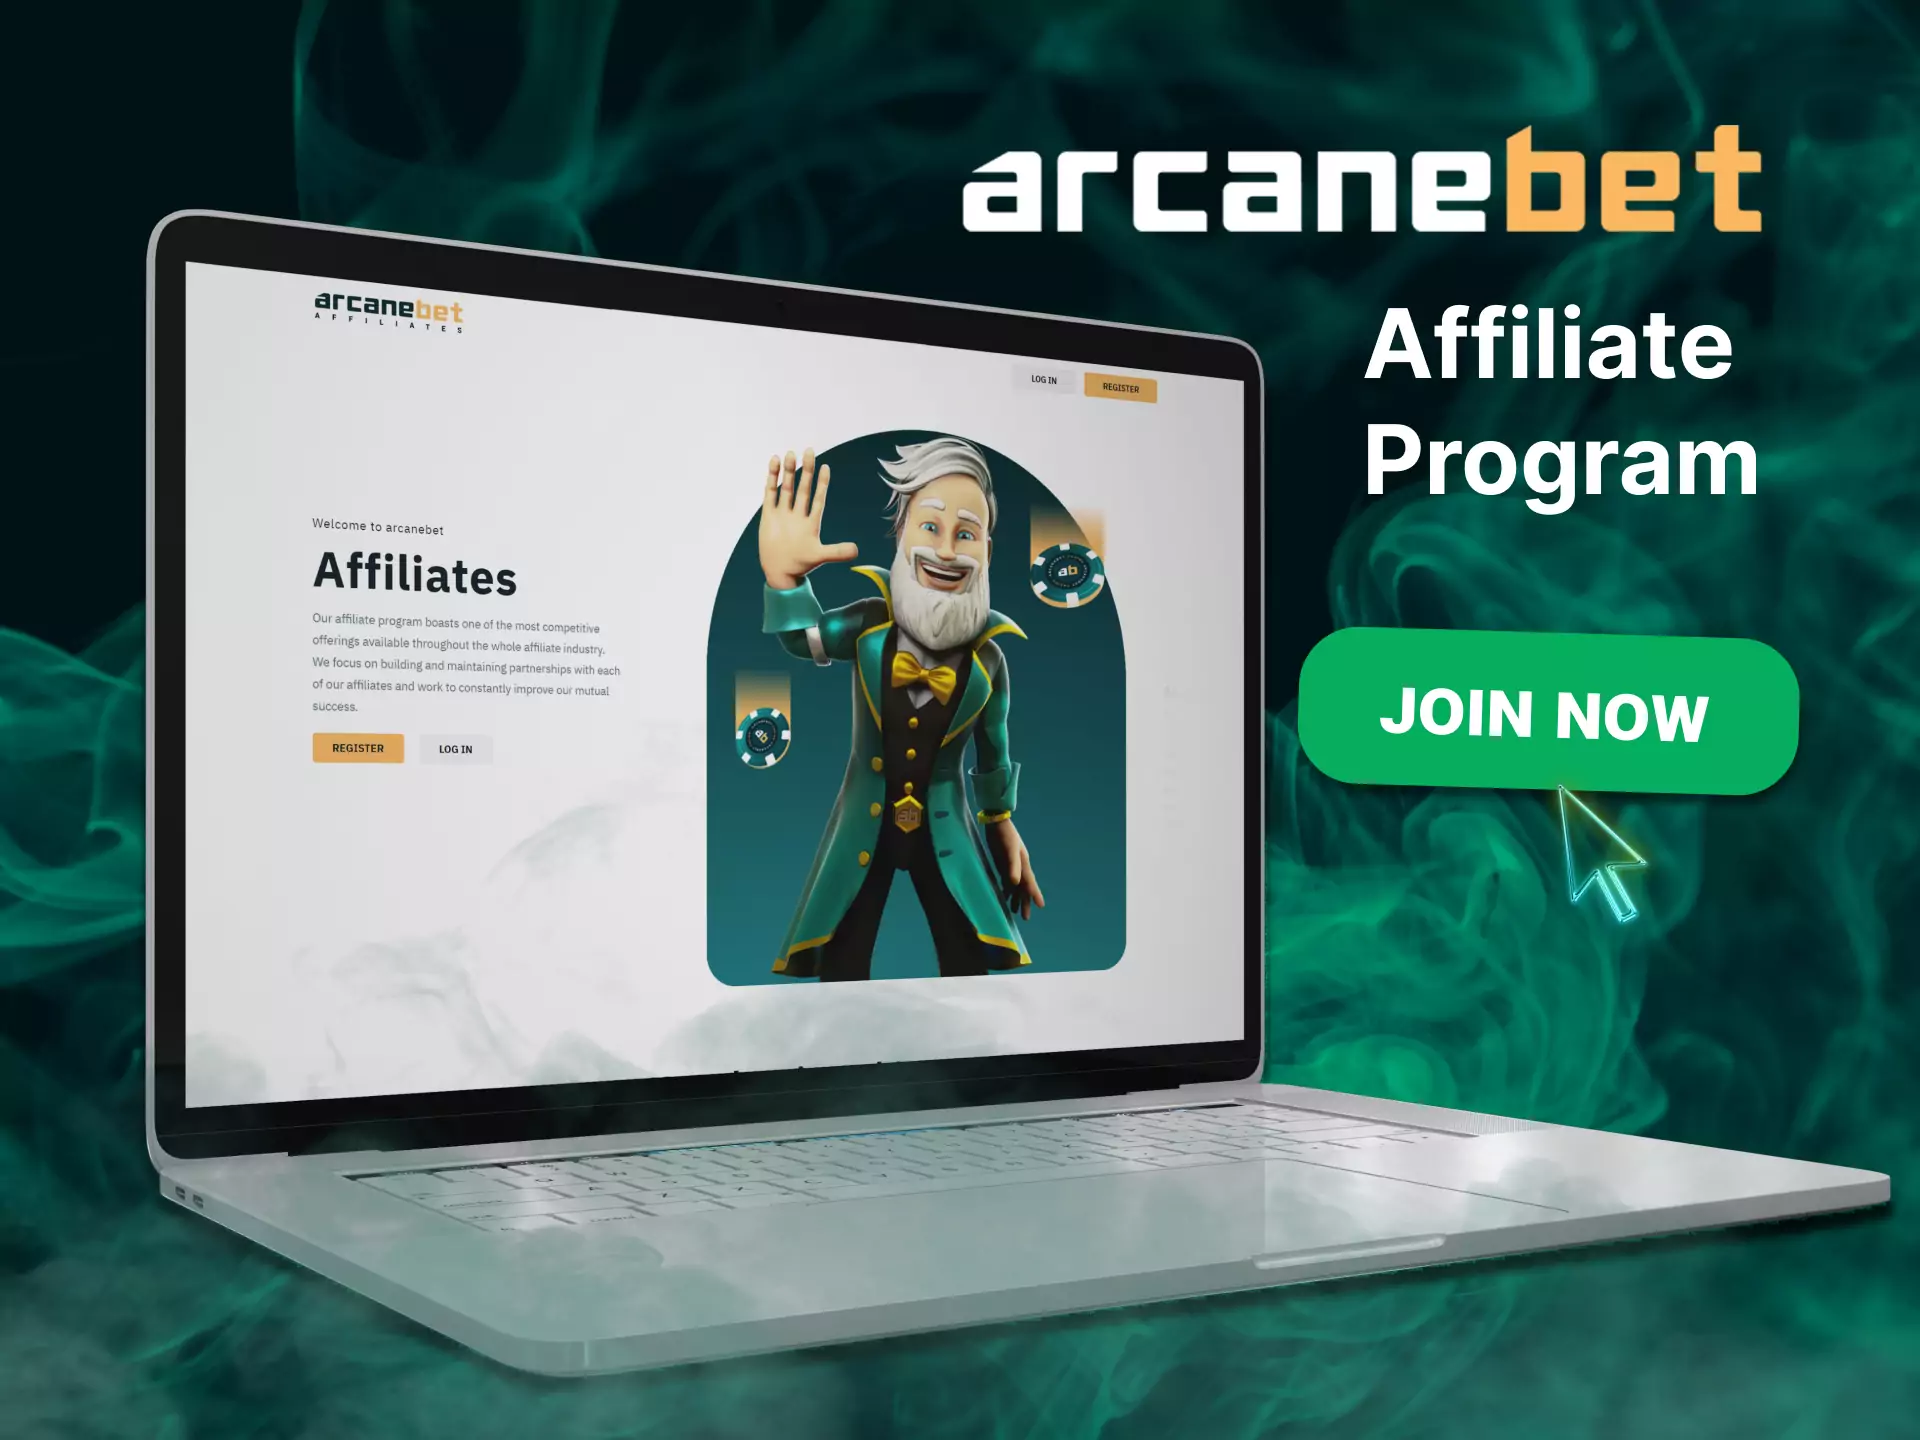 Become an Arcanebet partner and get more benefits.